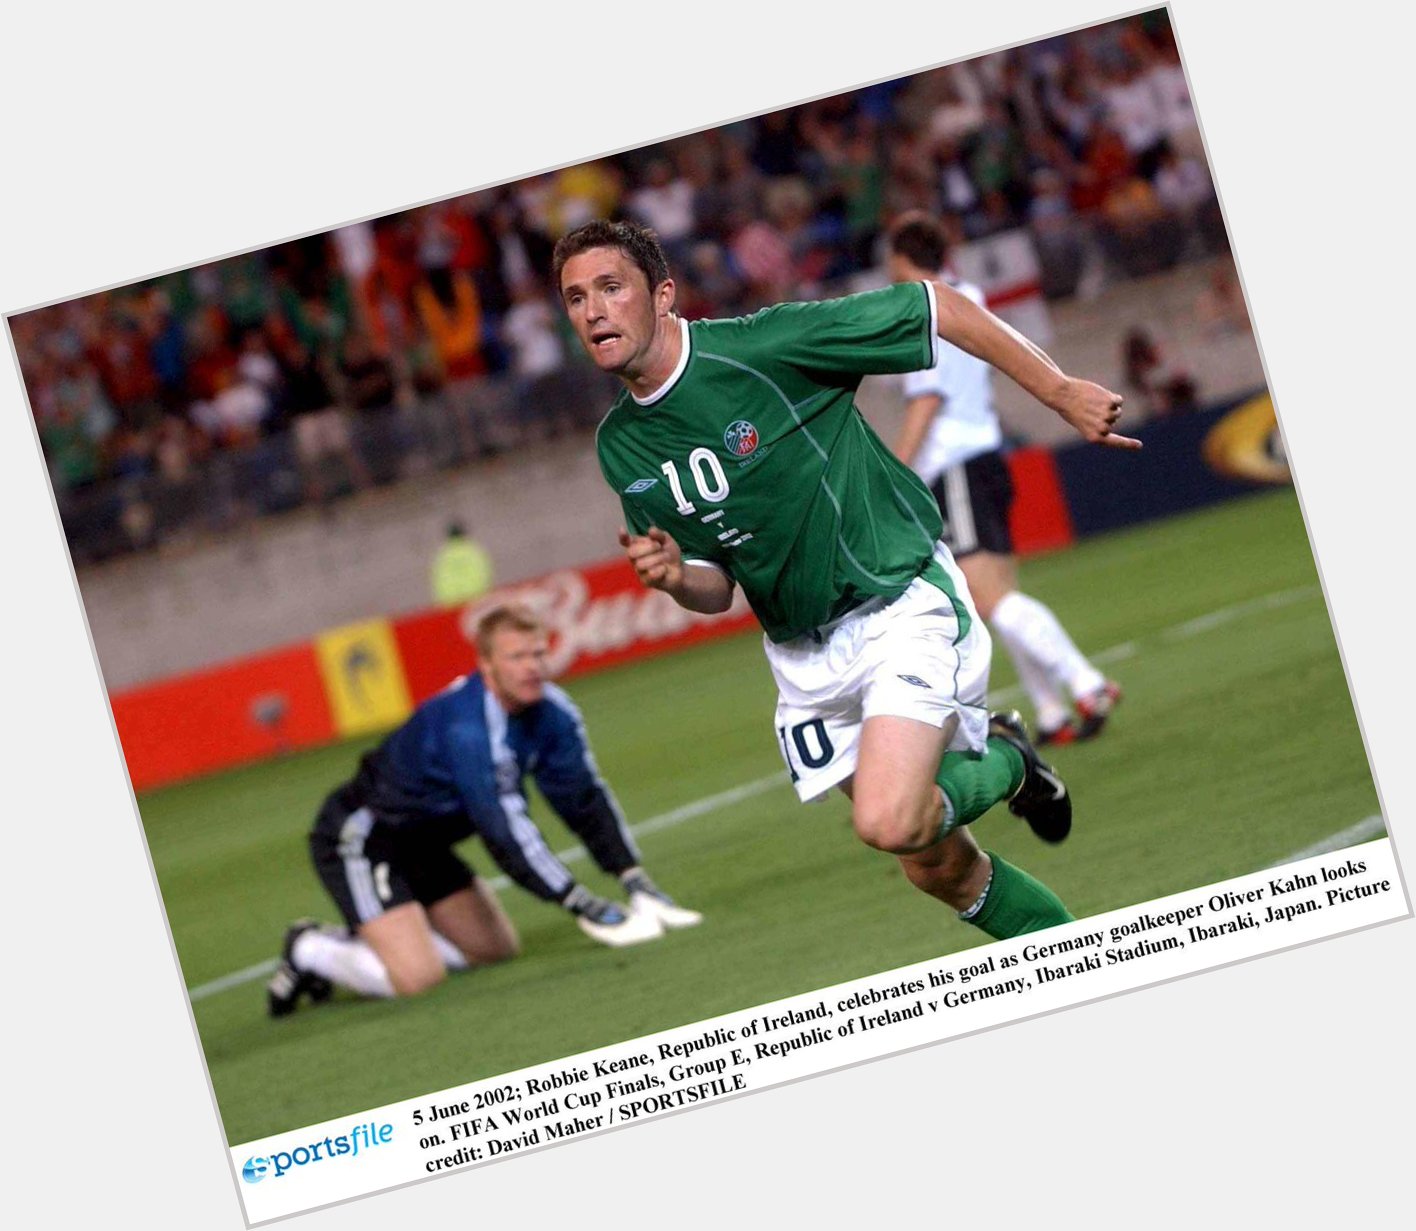 Happy Birthday Robbie Keane! The & captain is 35 today! What are your favourite Keane moments? 